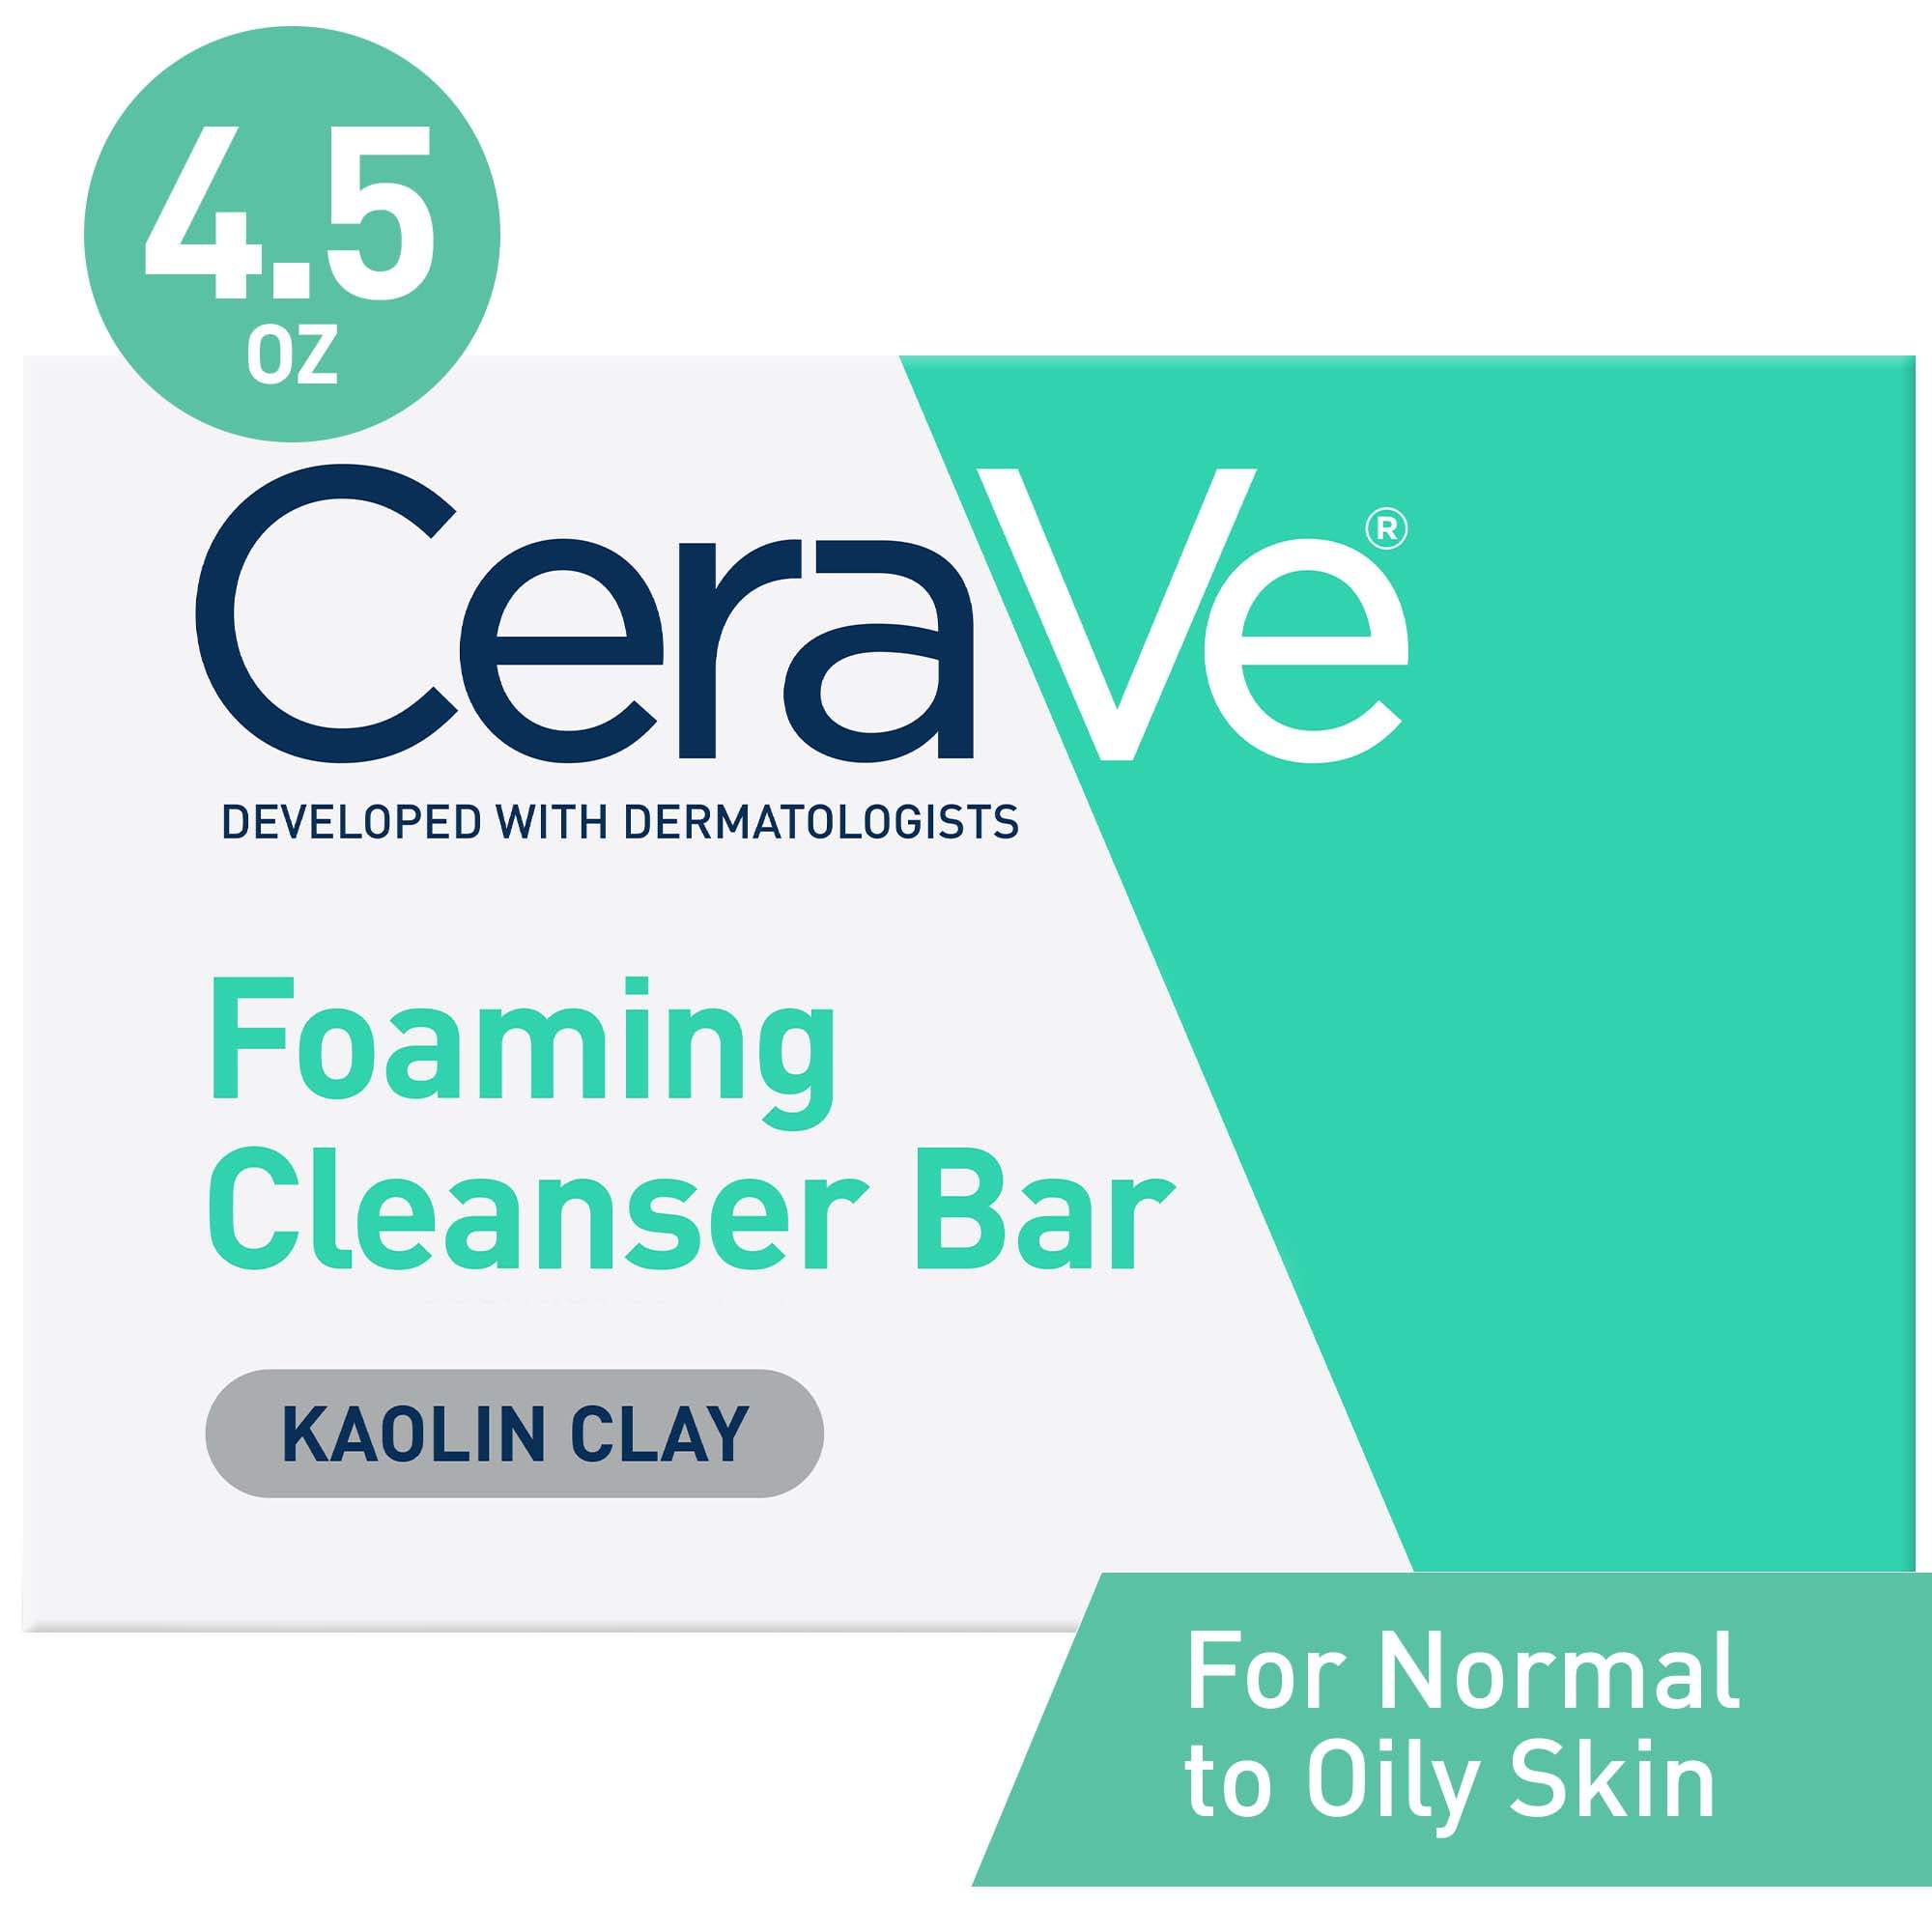 CeraVe Foaming Cleanser Bar for Oily Skin, Body and Face, Soap-free & Fragrance Free, 4.5 oz